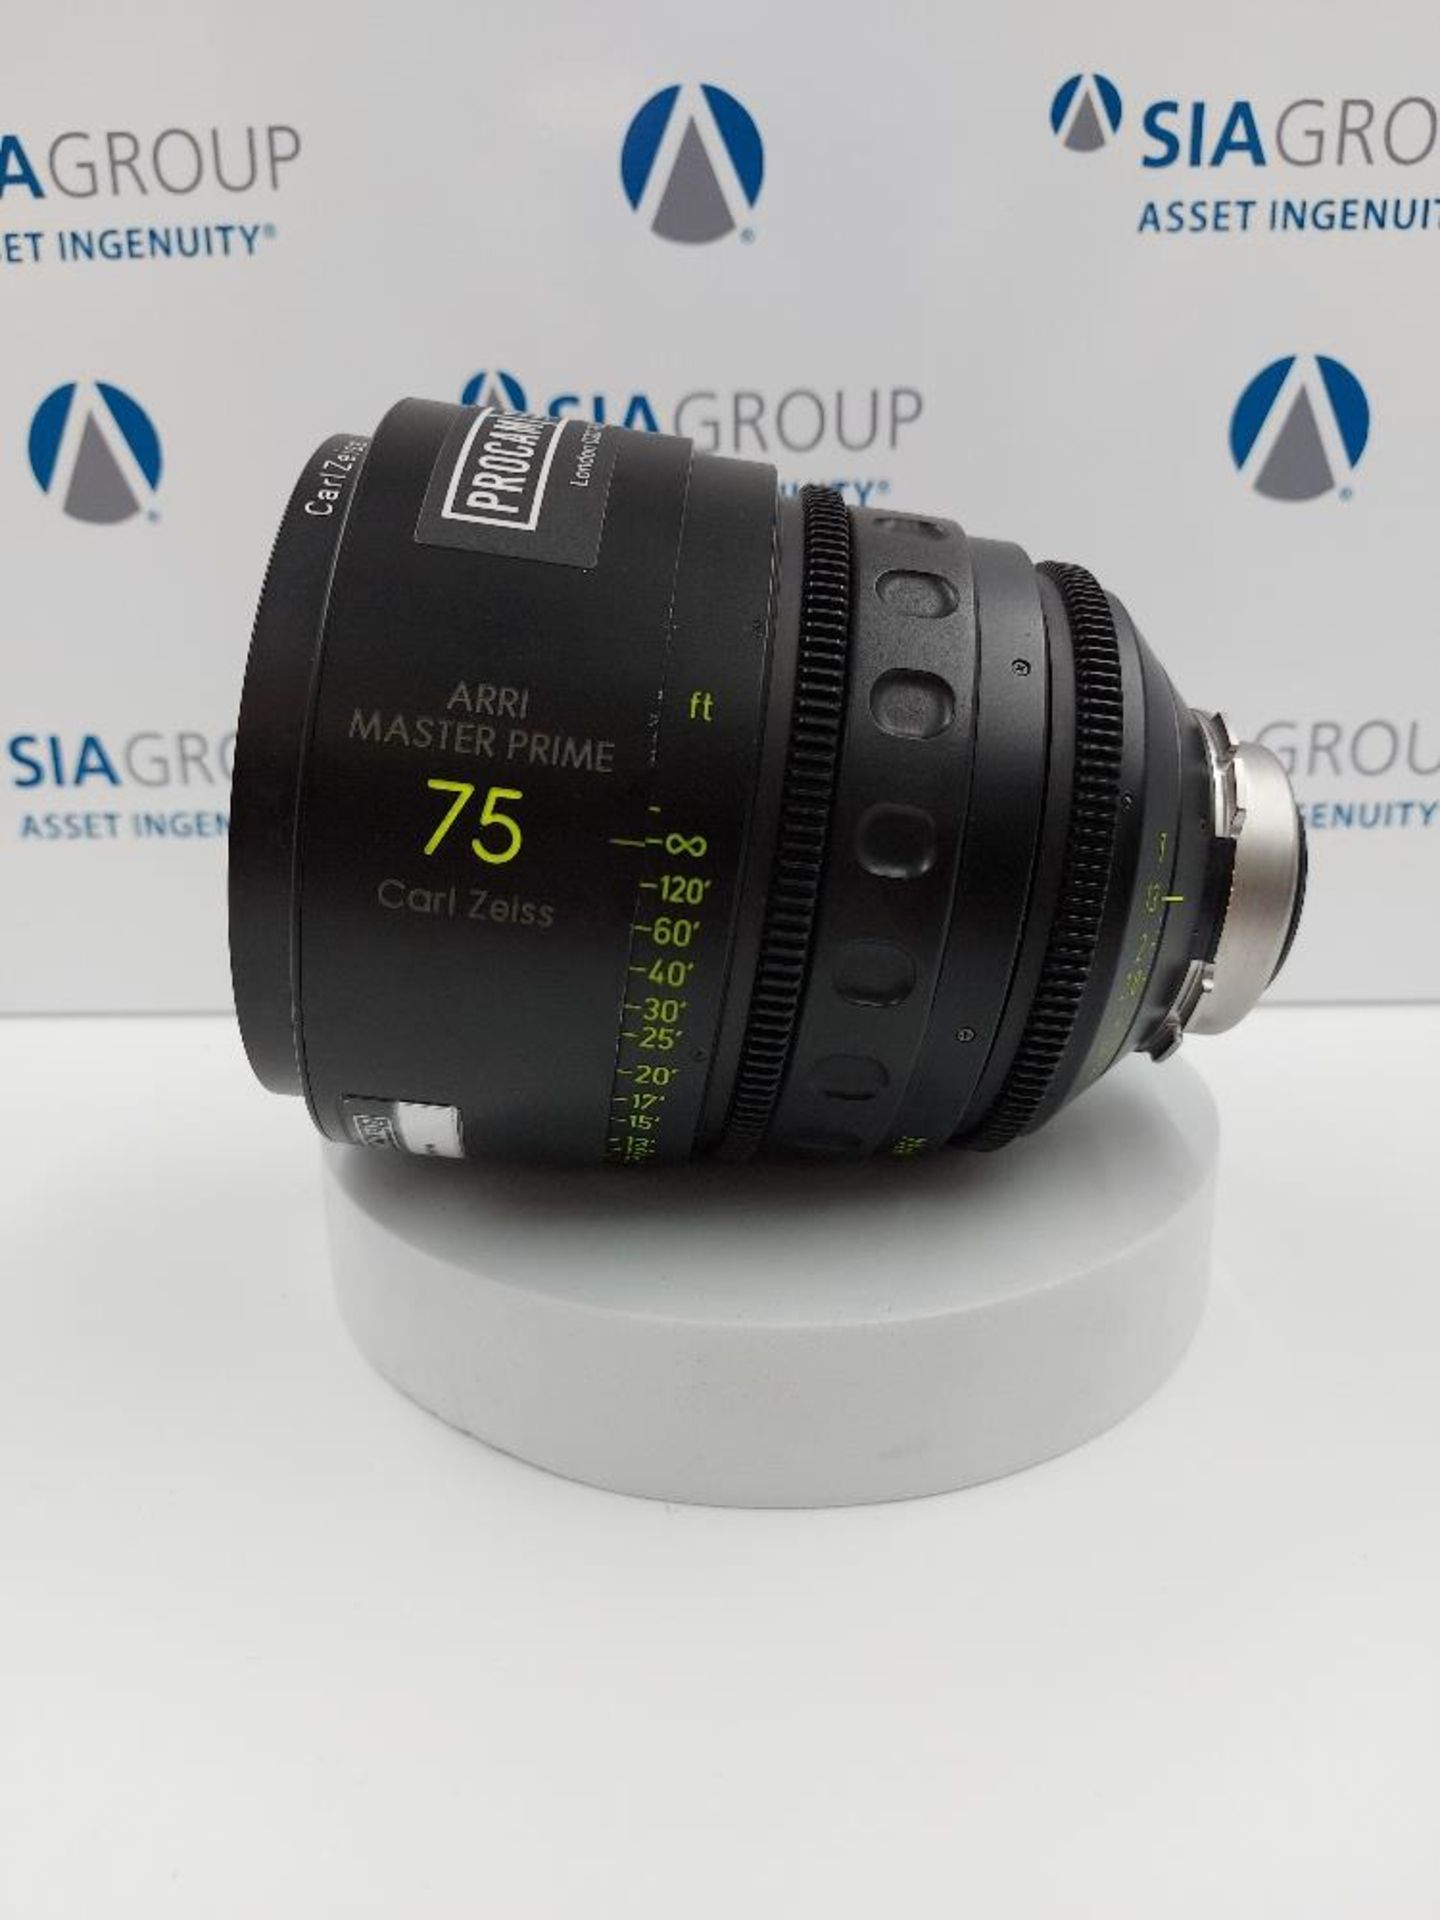 Zeiss ARRI Master Prime 75mm T1.3 Lens with PL Mount - Image 4 of 6